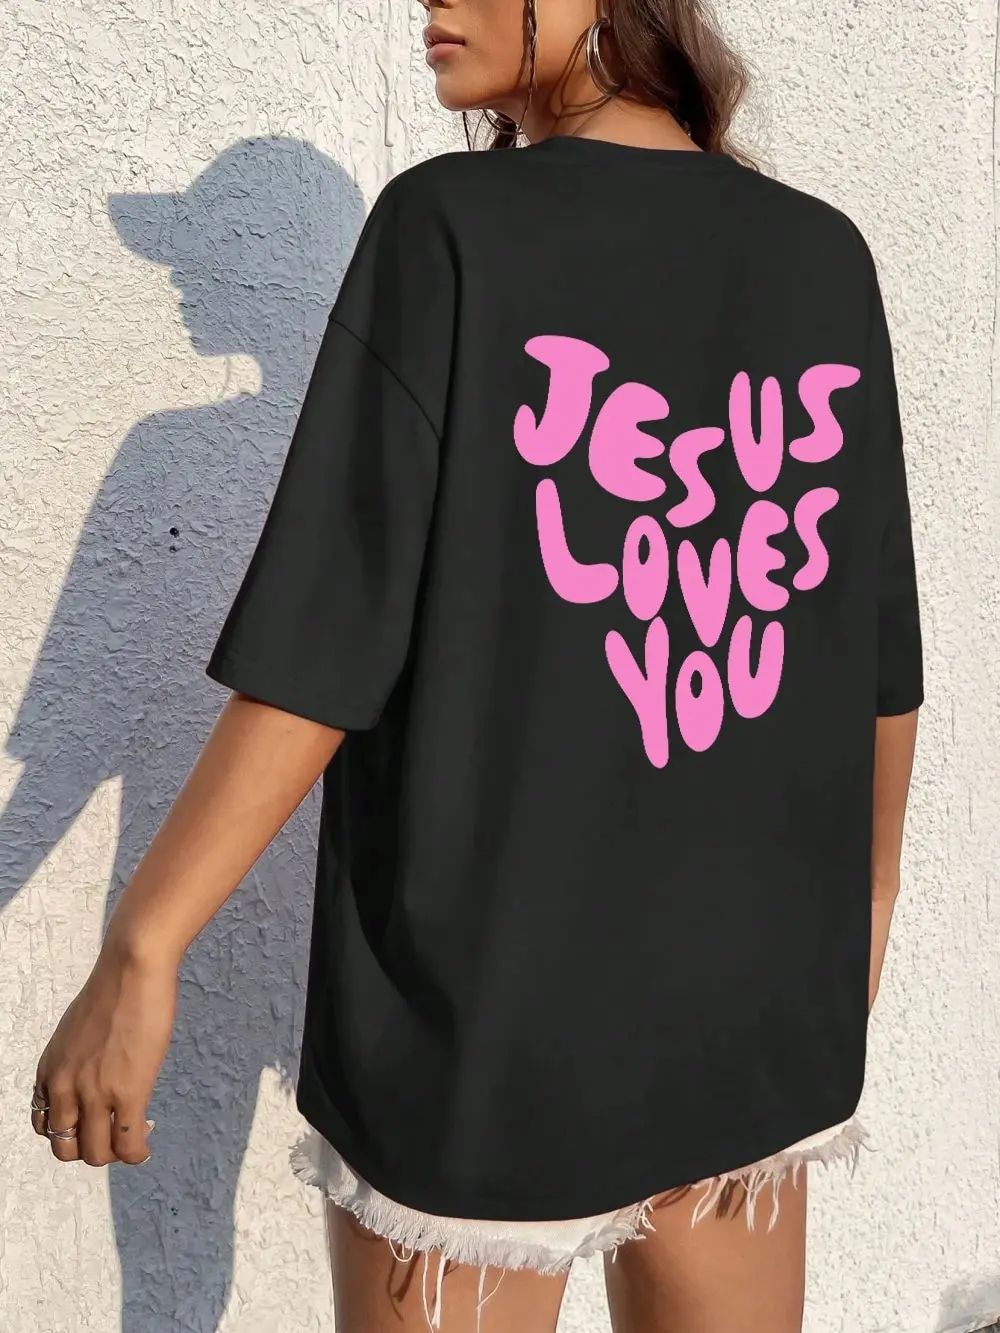 

Jesus Loves Me Letter Prints T-Shirts For Women Fashion O-Neck Cotton Tees Tops Casual Loose Soft Short Sleeve Female Clothing